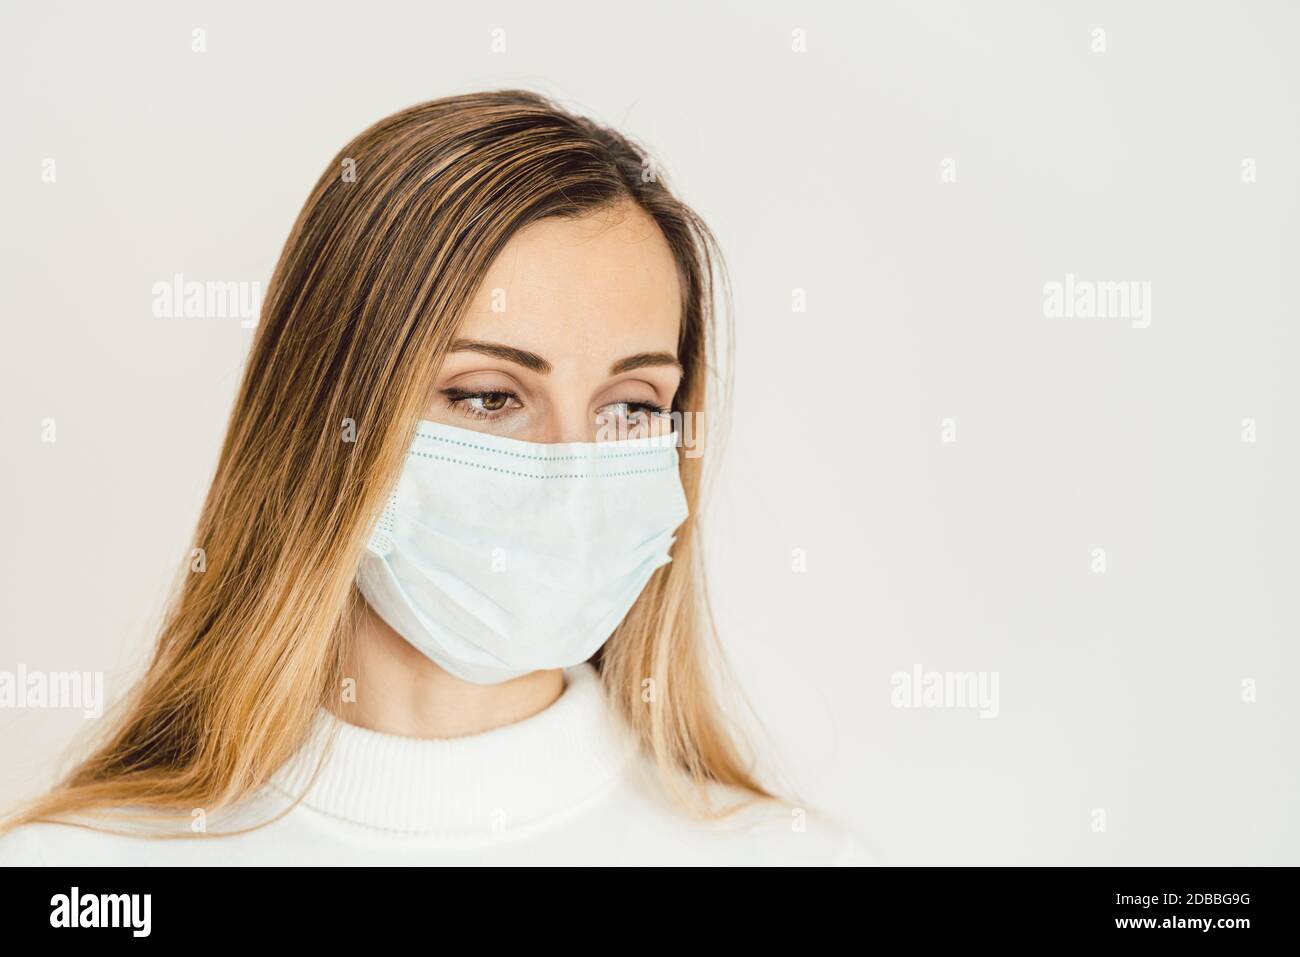 Woman contemplating what lies ahead during Coronavirus crisis being worried Stock Photo